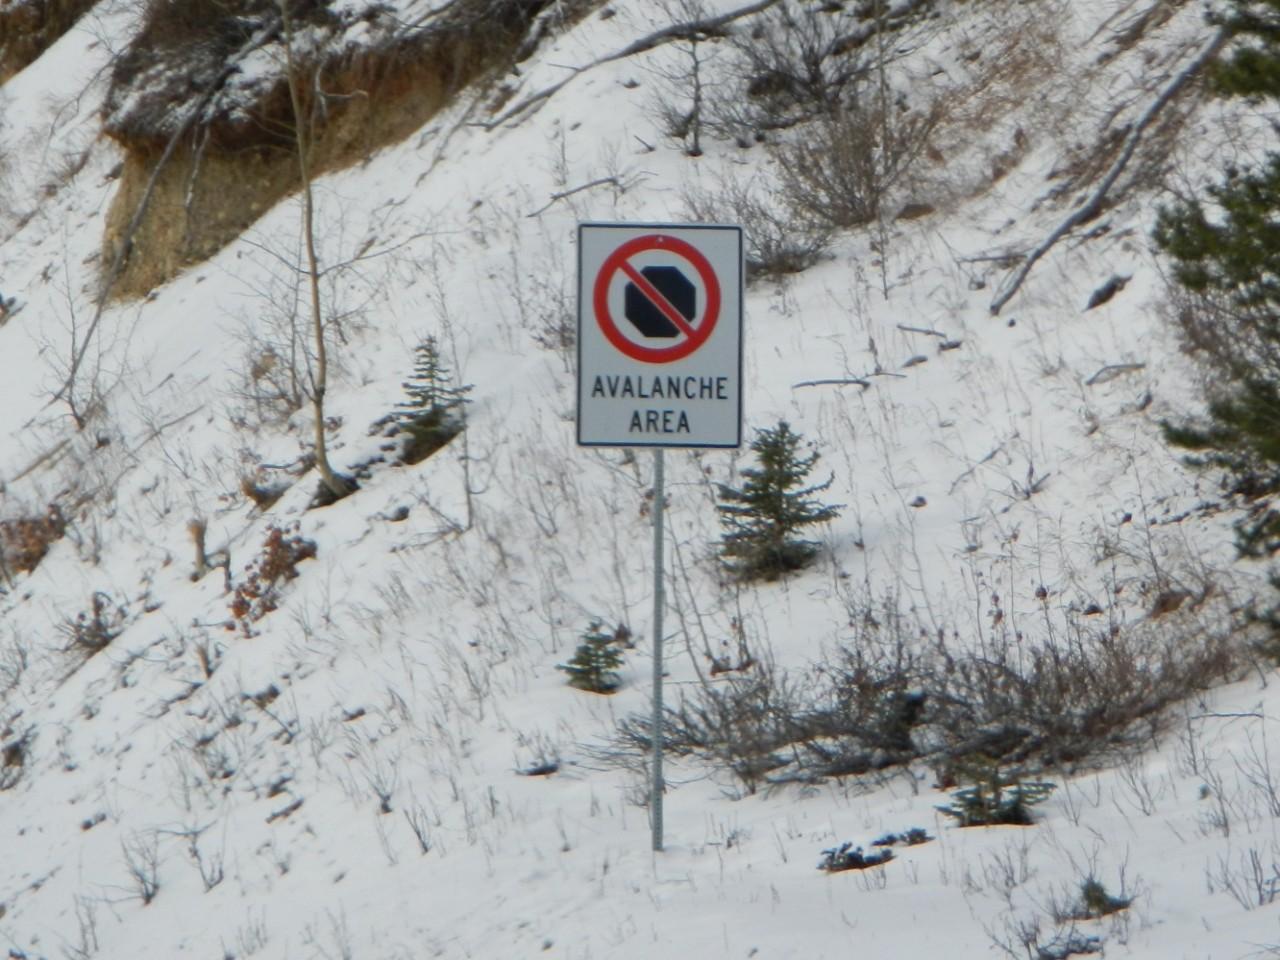 There were many of these avalanche Area Signs